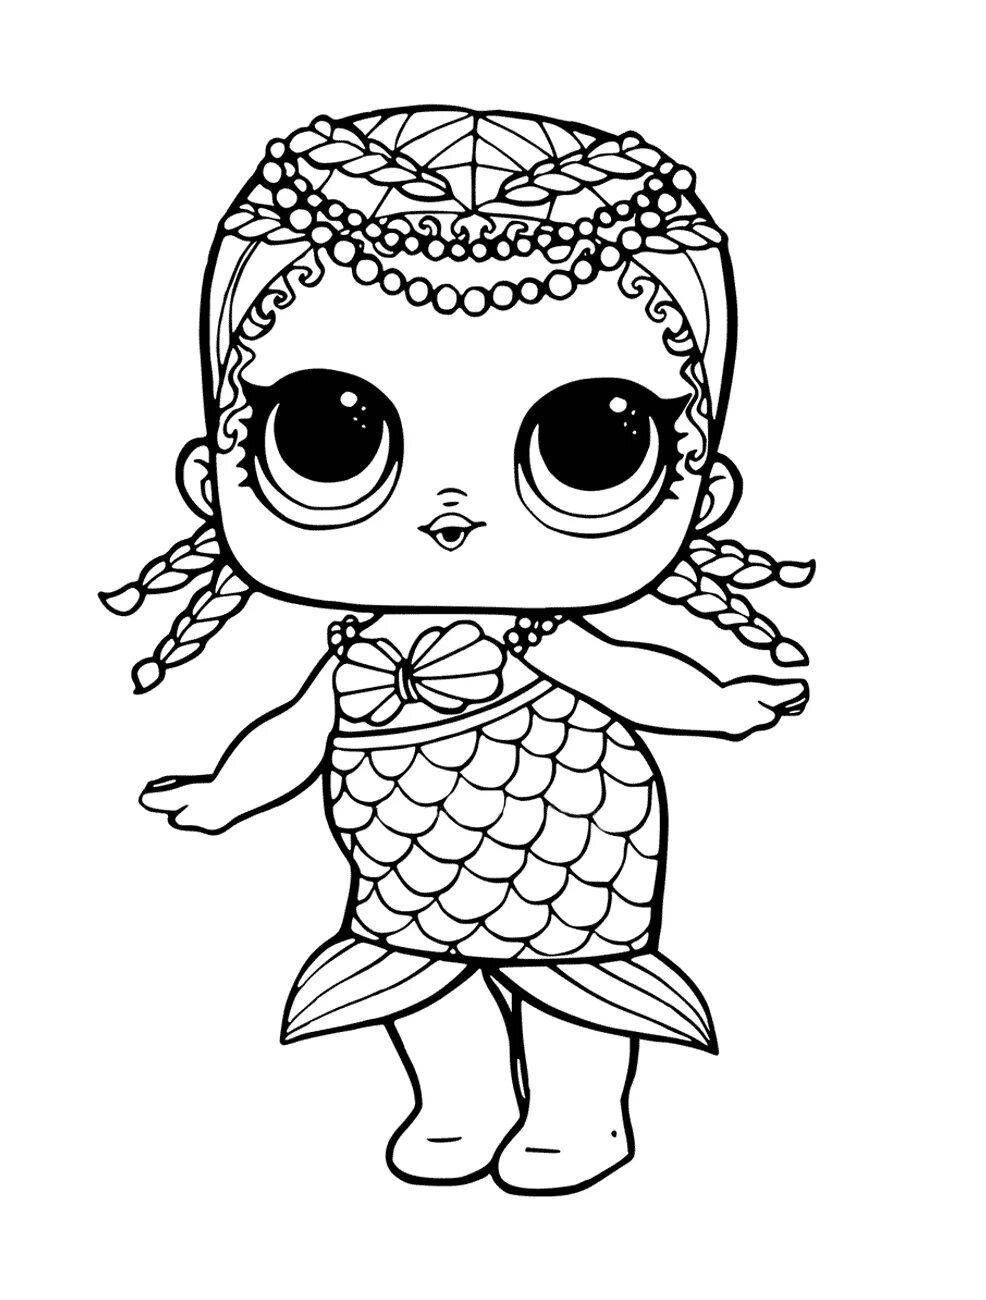 Funny lol coloring page